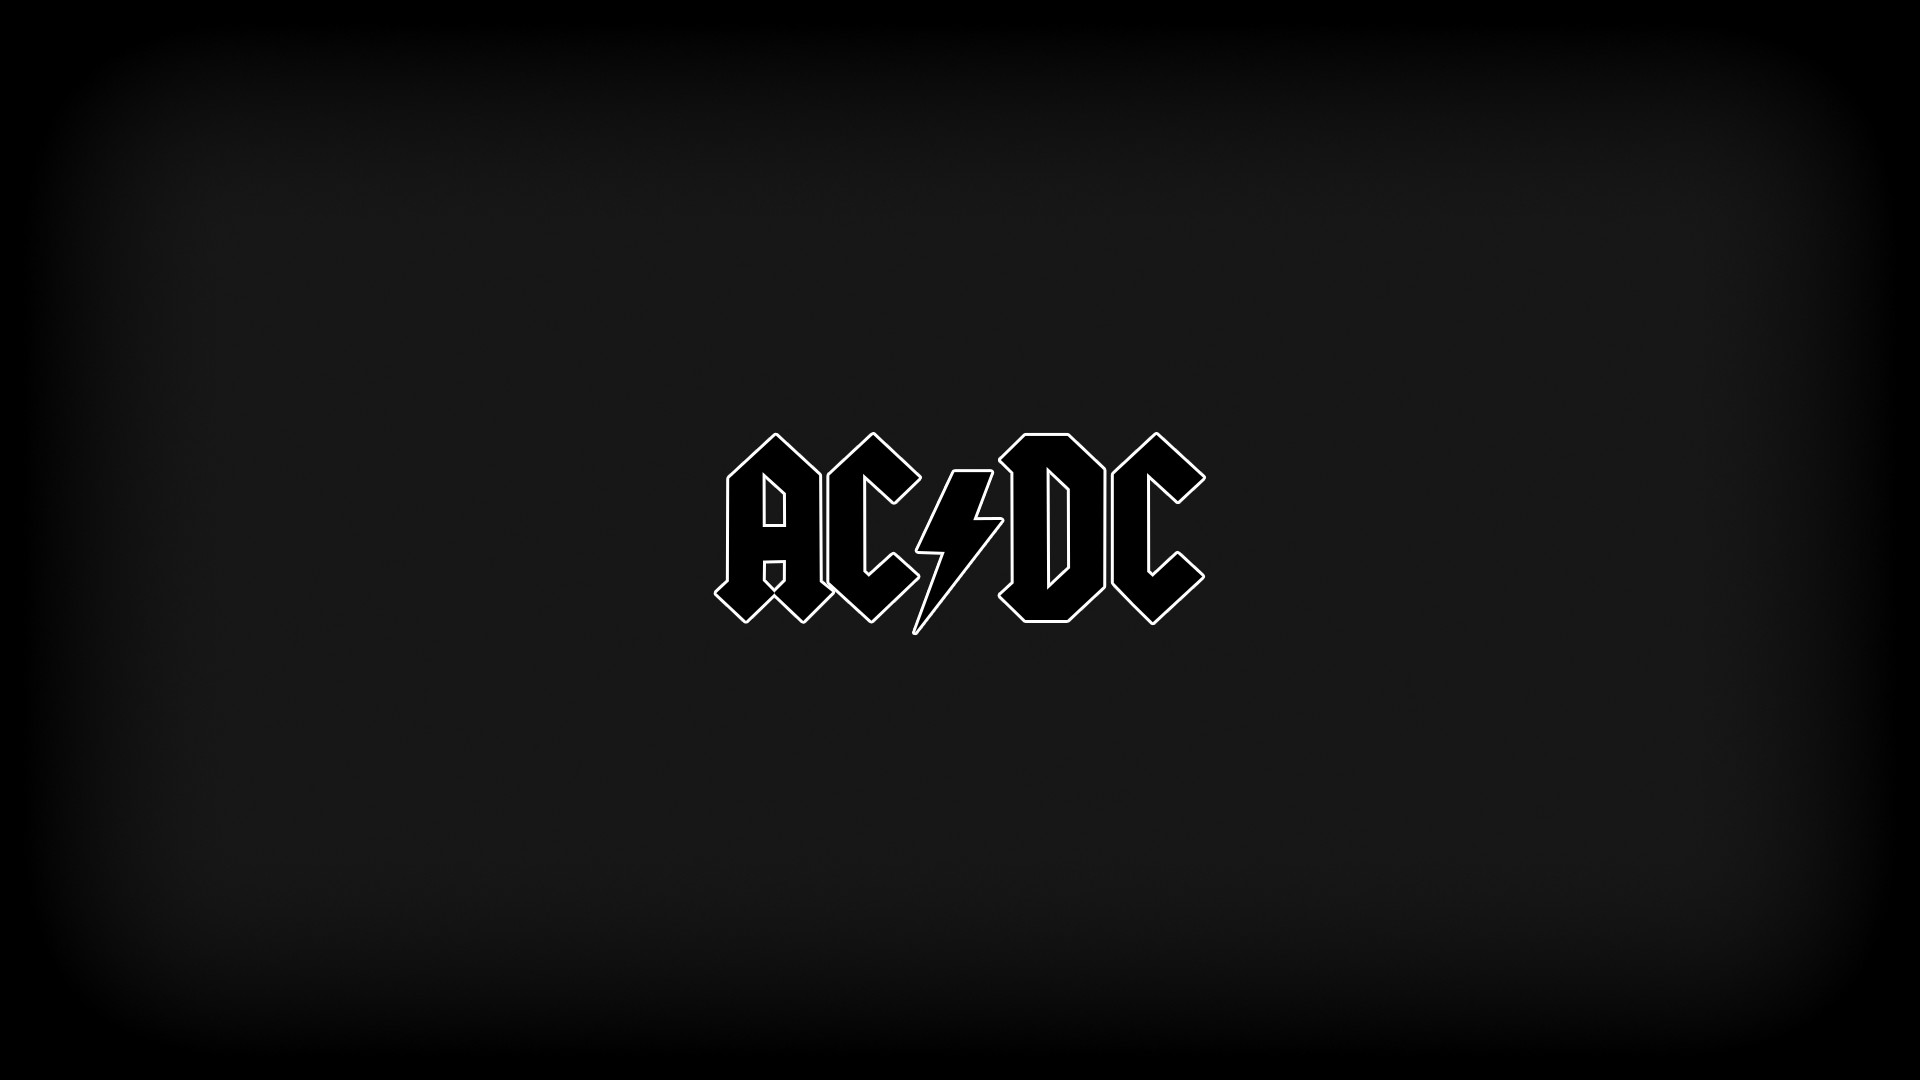 General acdc AC / DC rock